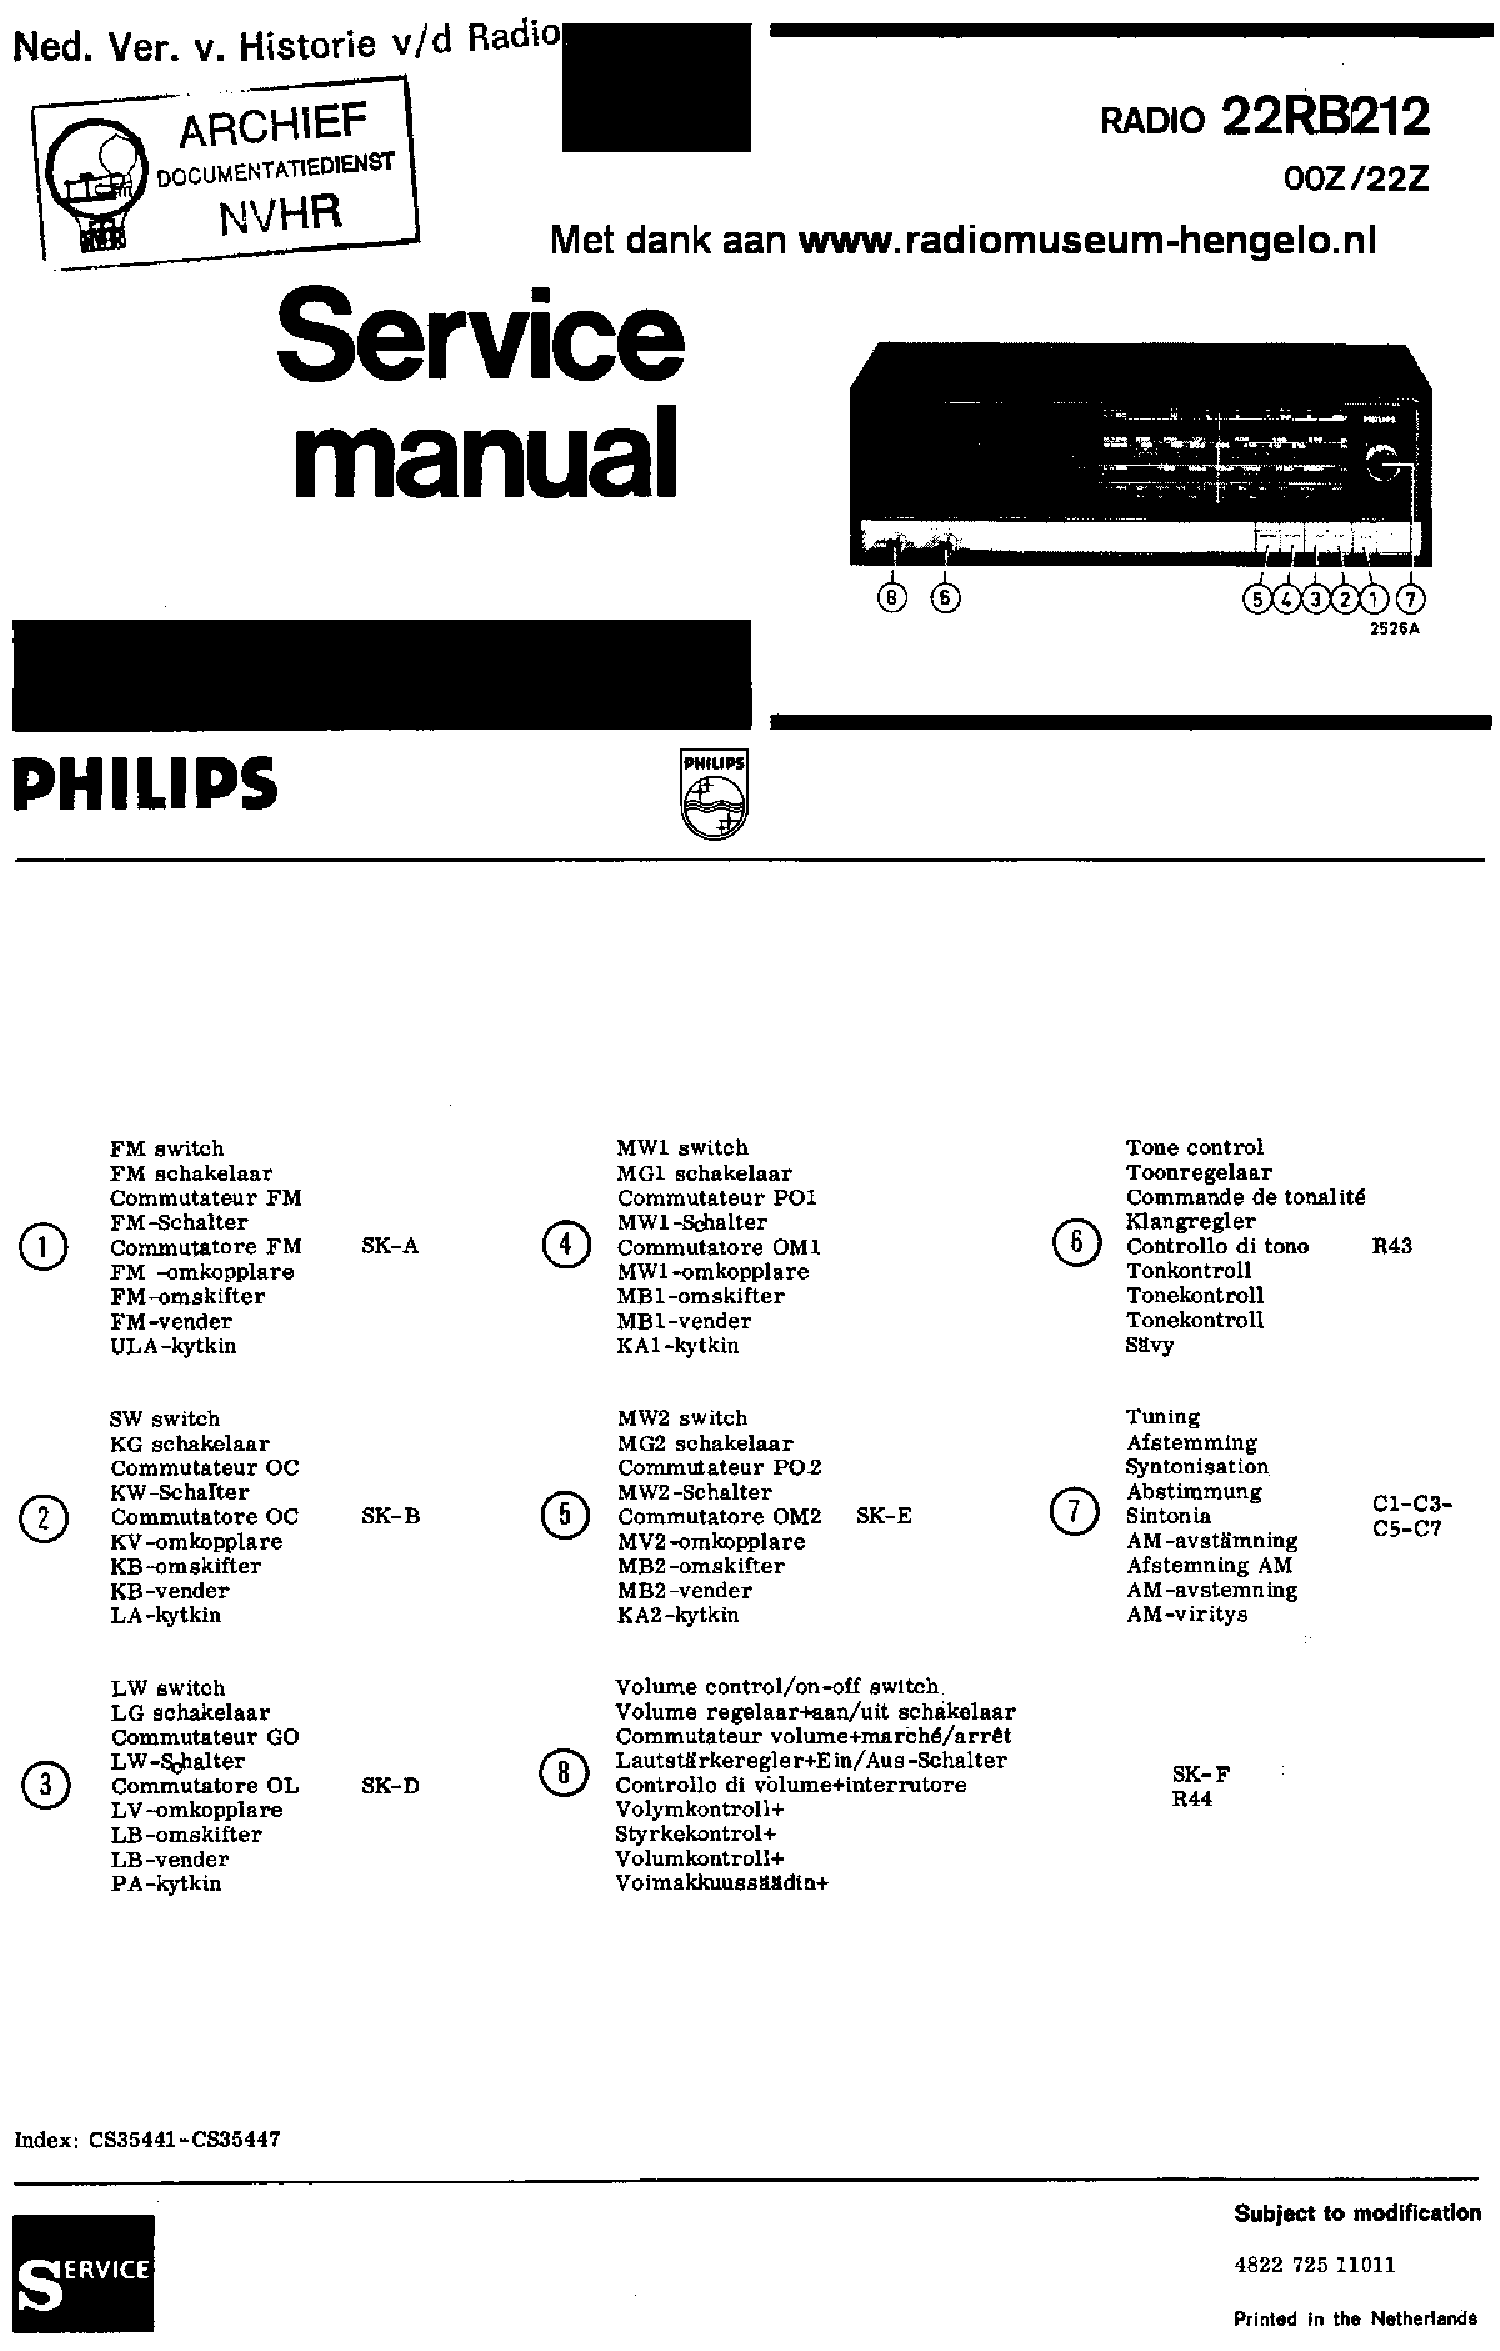 PHILIPS 22RB212 AM-FM RADIO 1973 SM service manual (1st page)